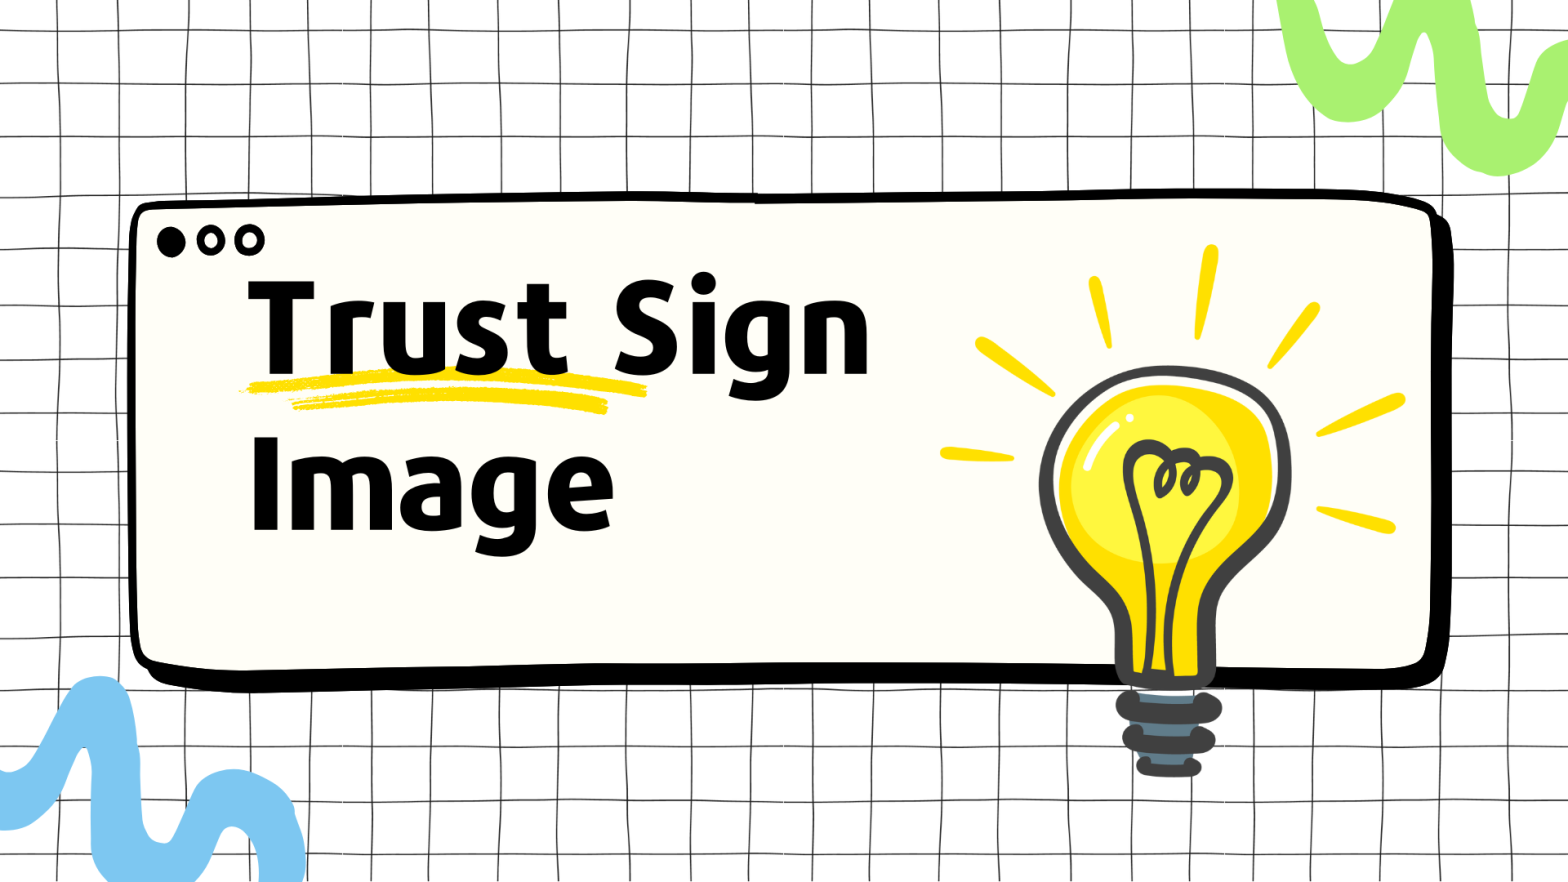 How to Trust Sign Image on Docker